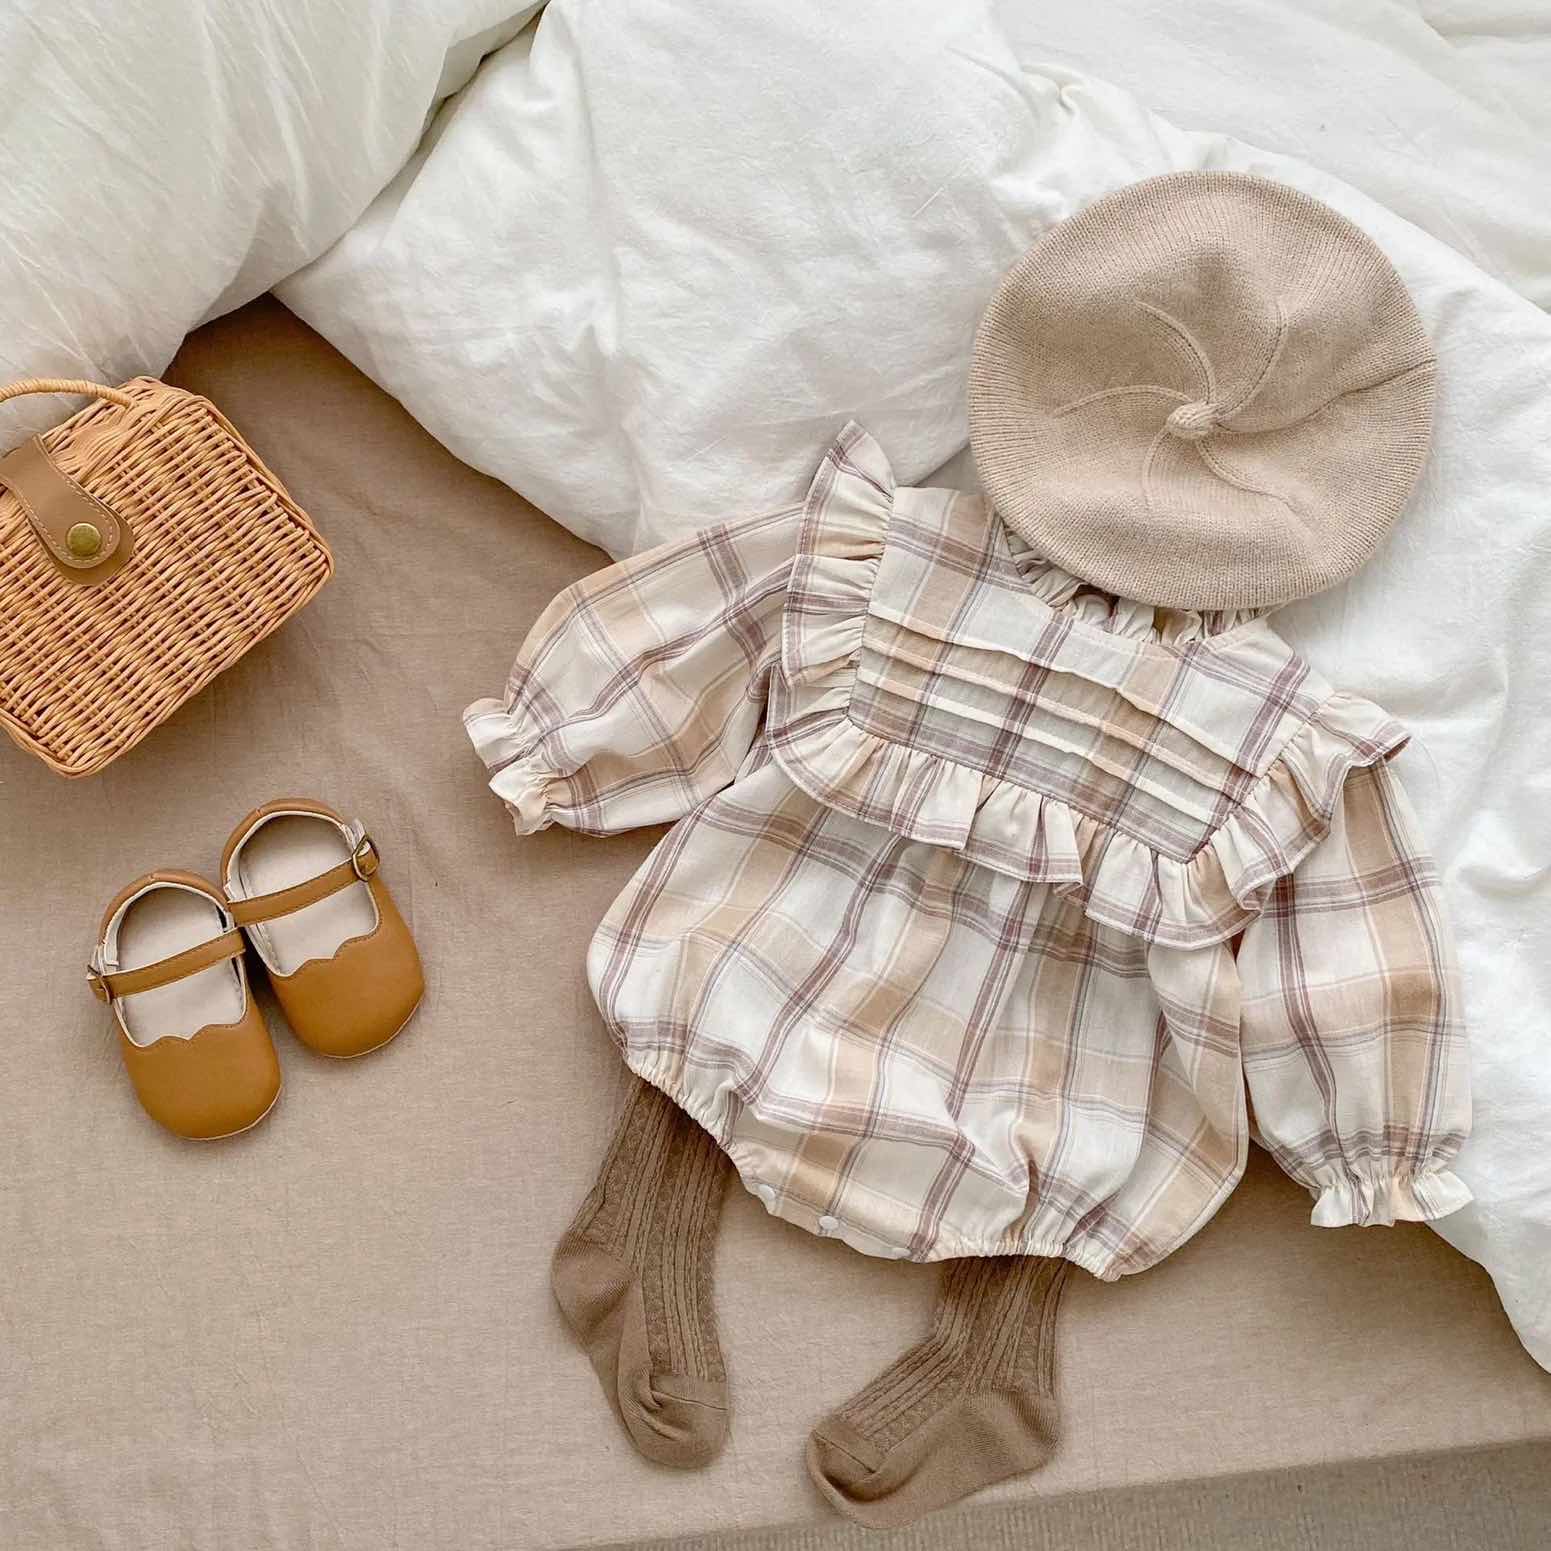 frilly romper displayed with baby socks, beret, rattan bag and baby shoes.